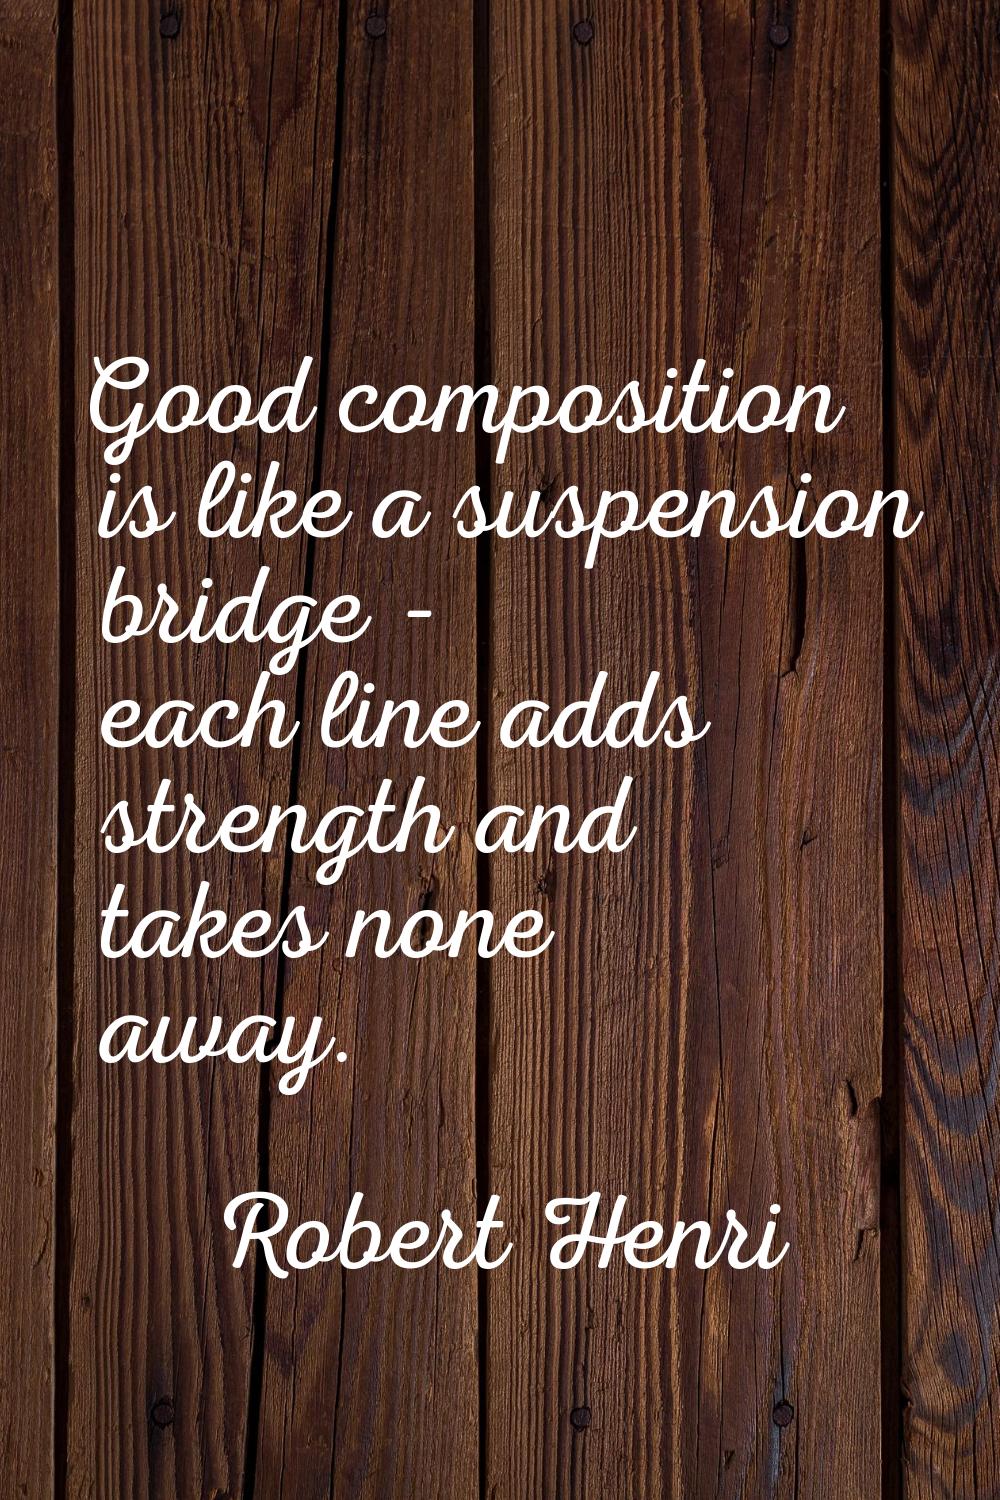 Good composition is like a suspension bridge - each line adds strength and takes none away.